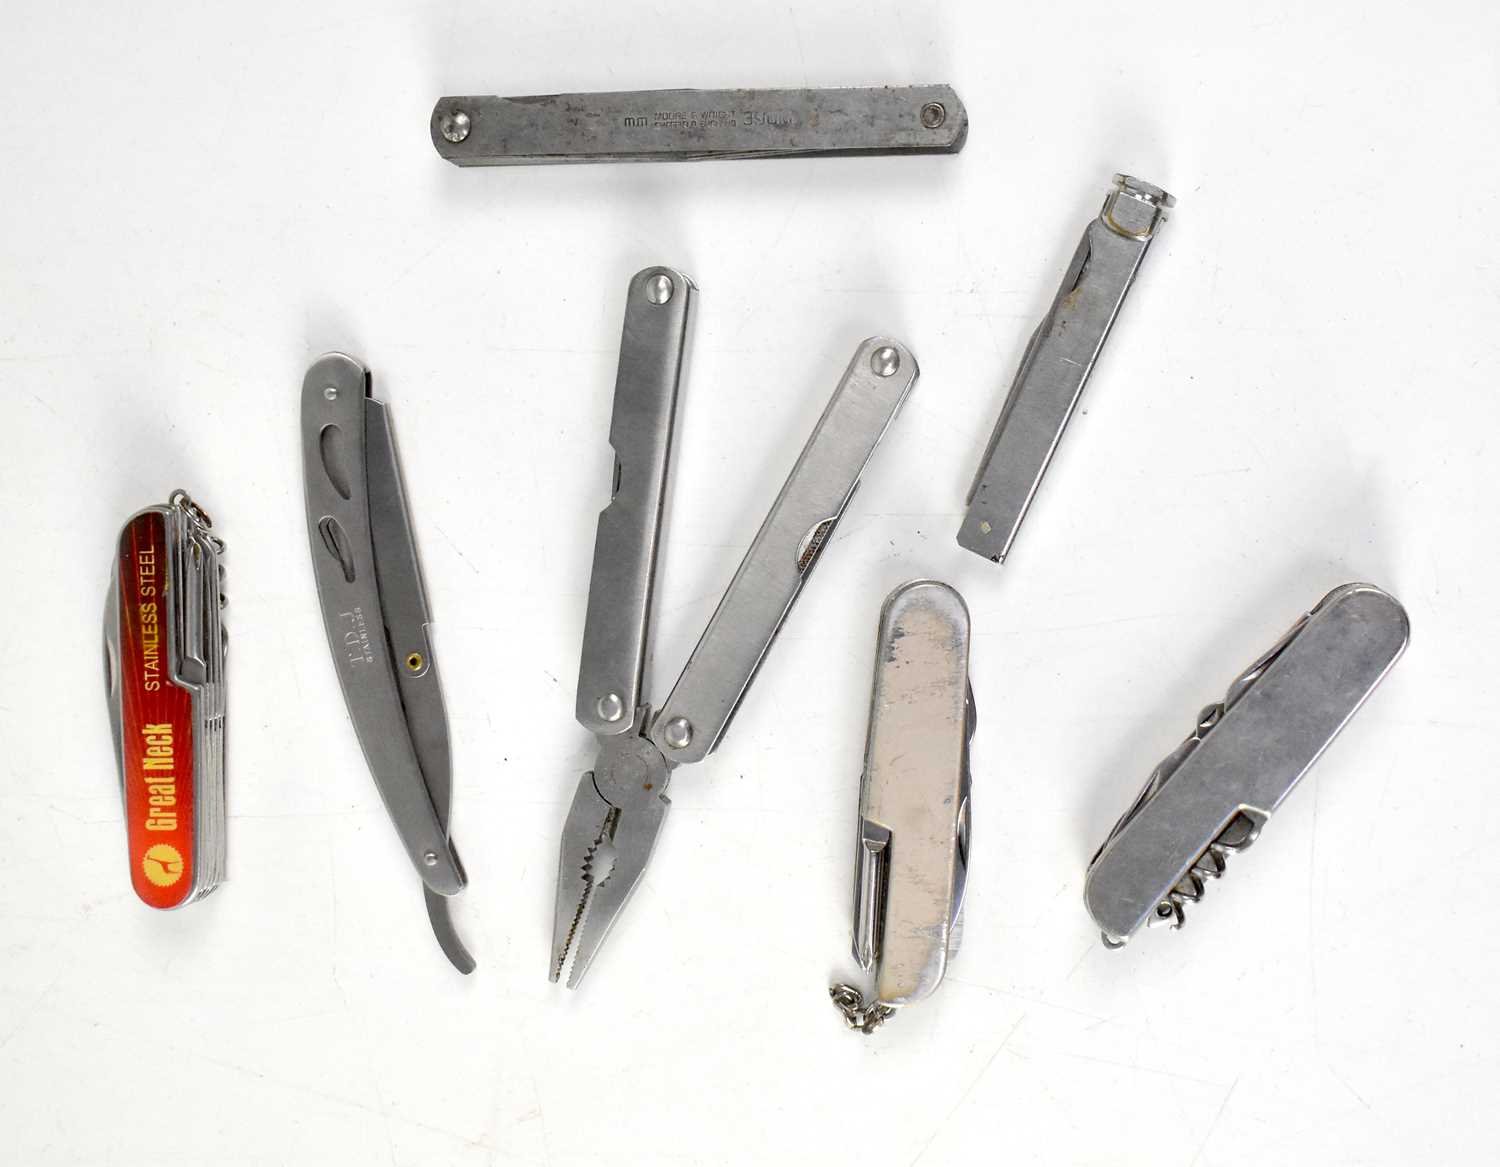 Seven various knives and multitools